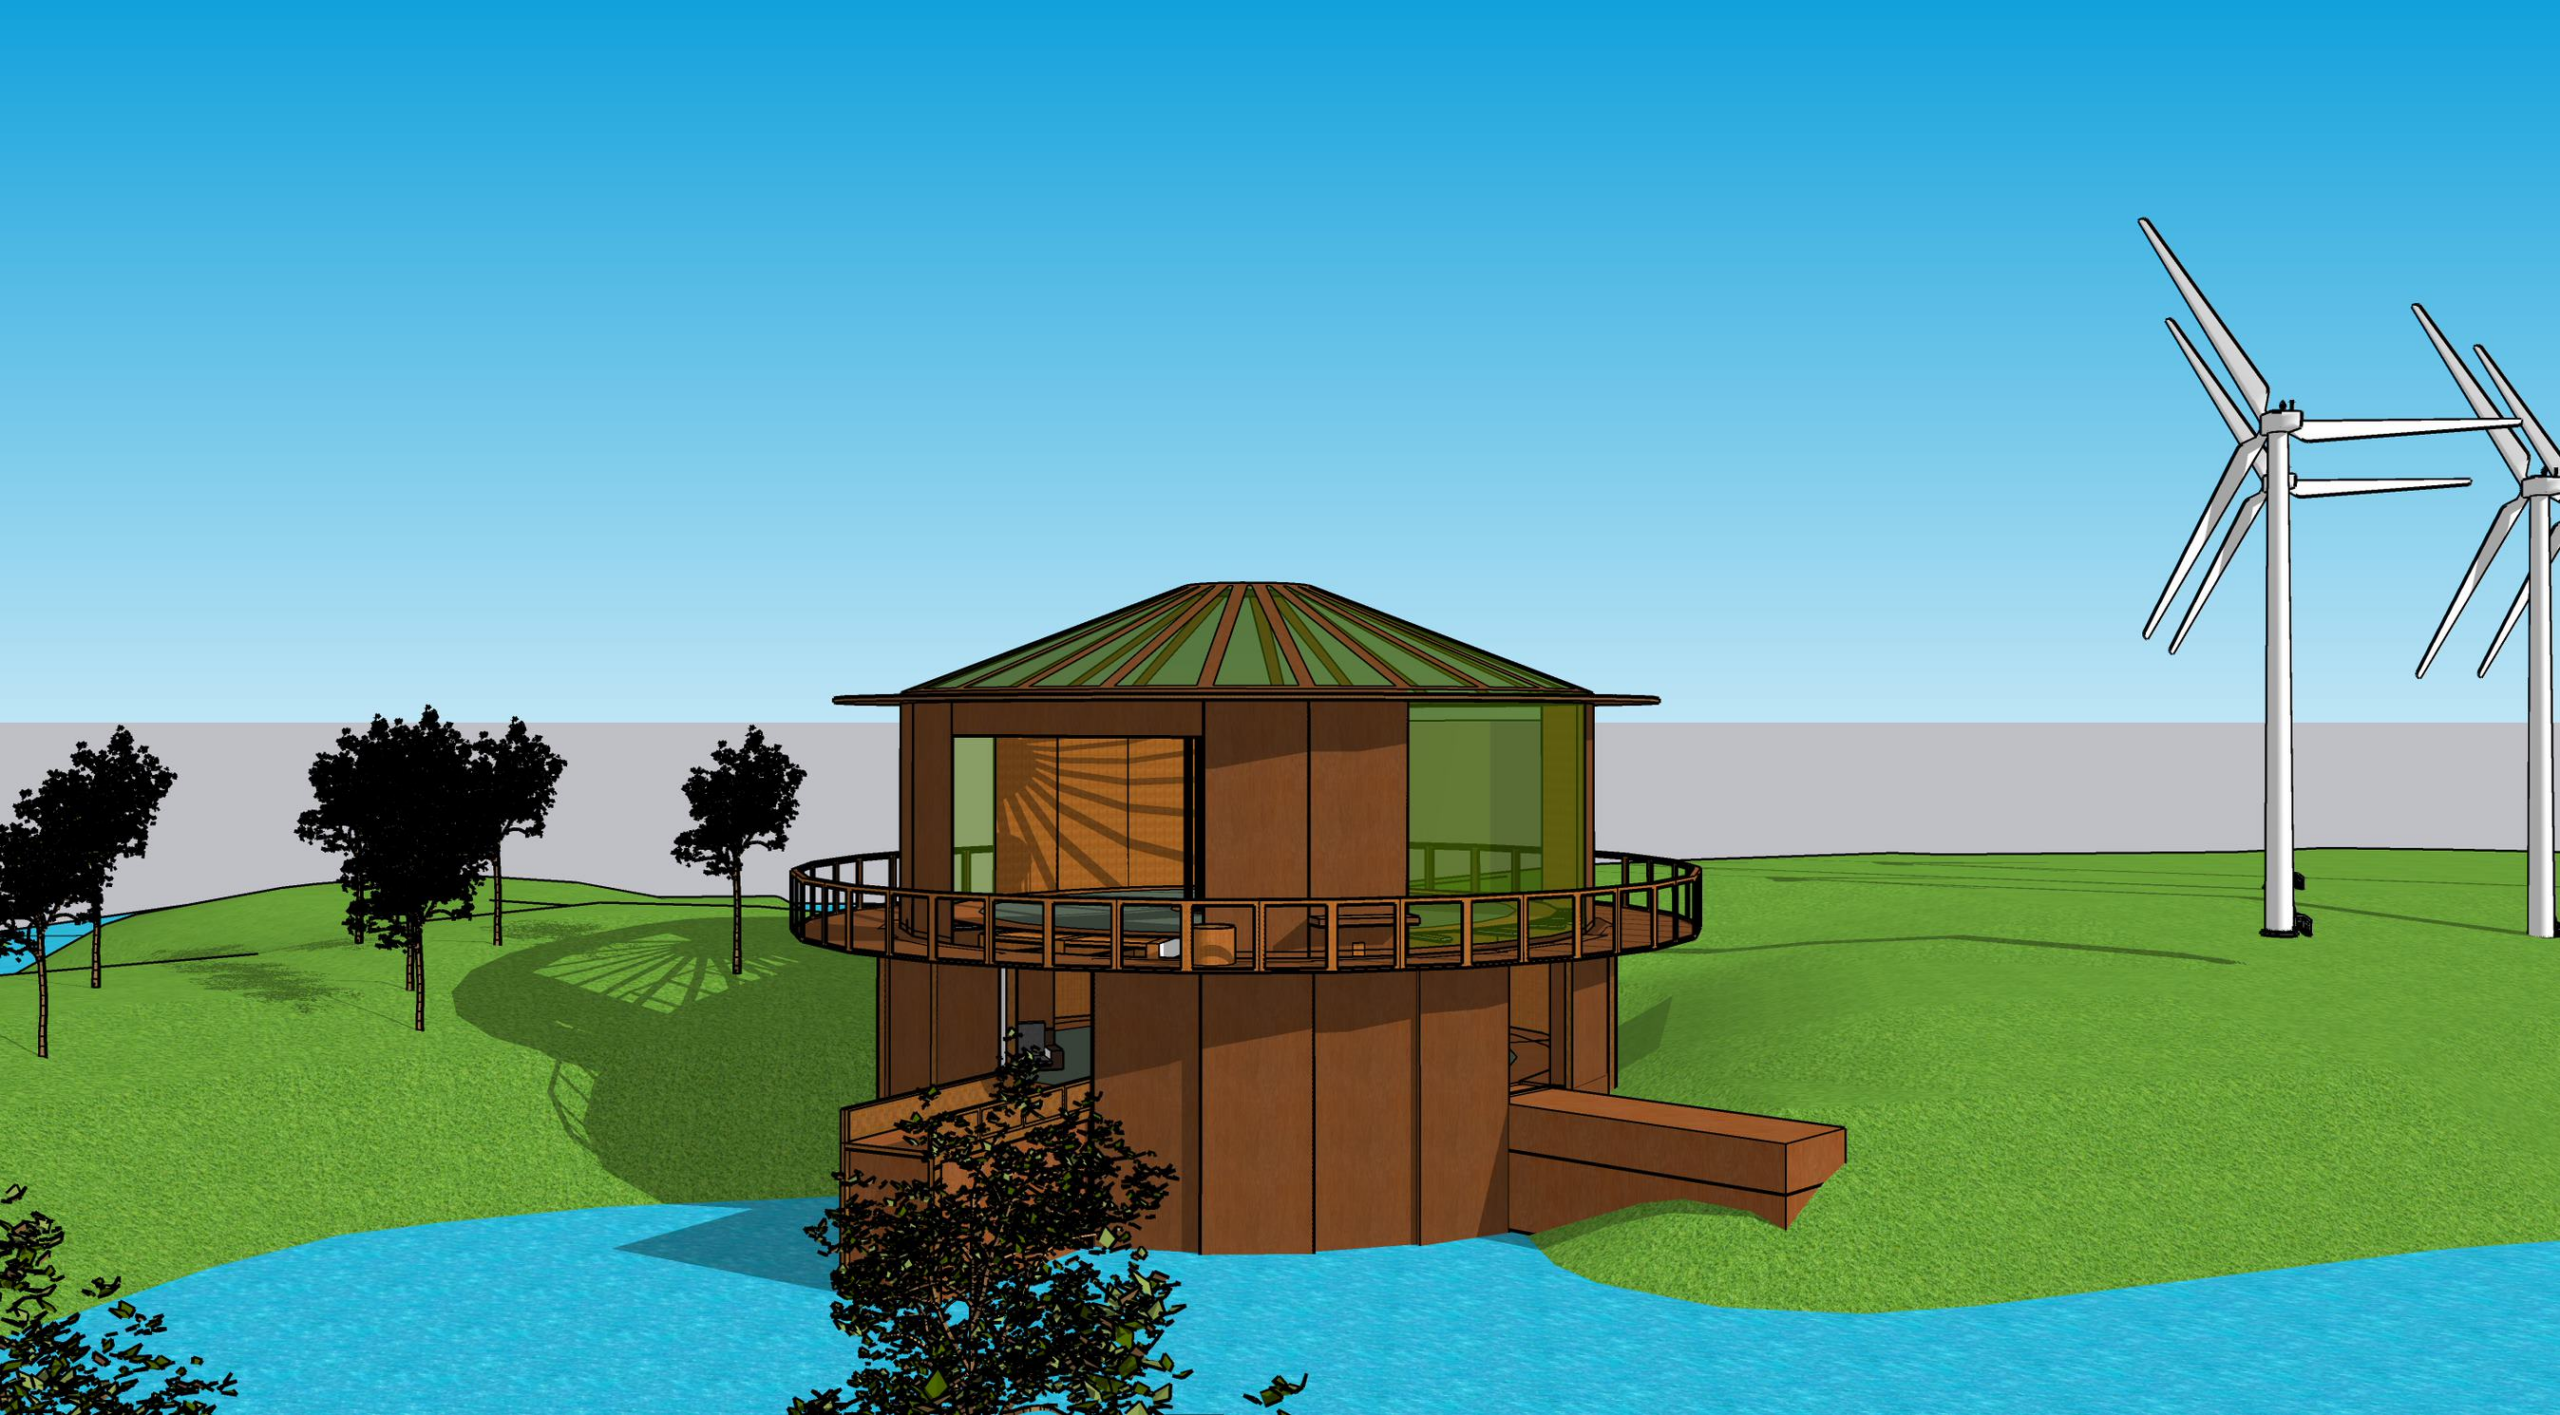 Digital model of round wooden house on a lake with windmills